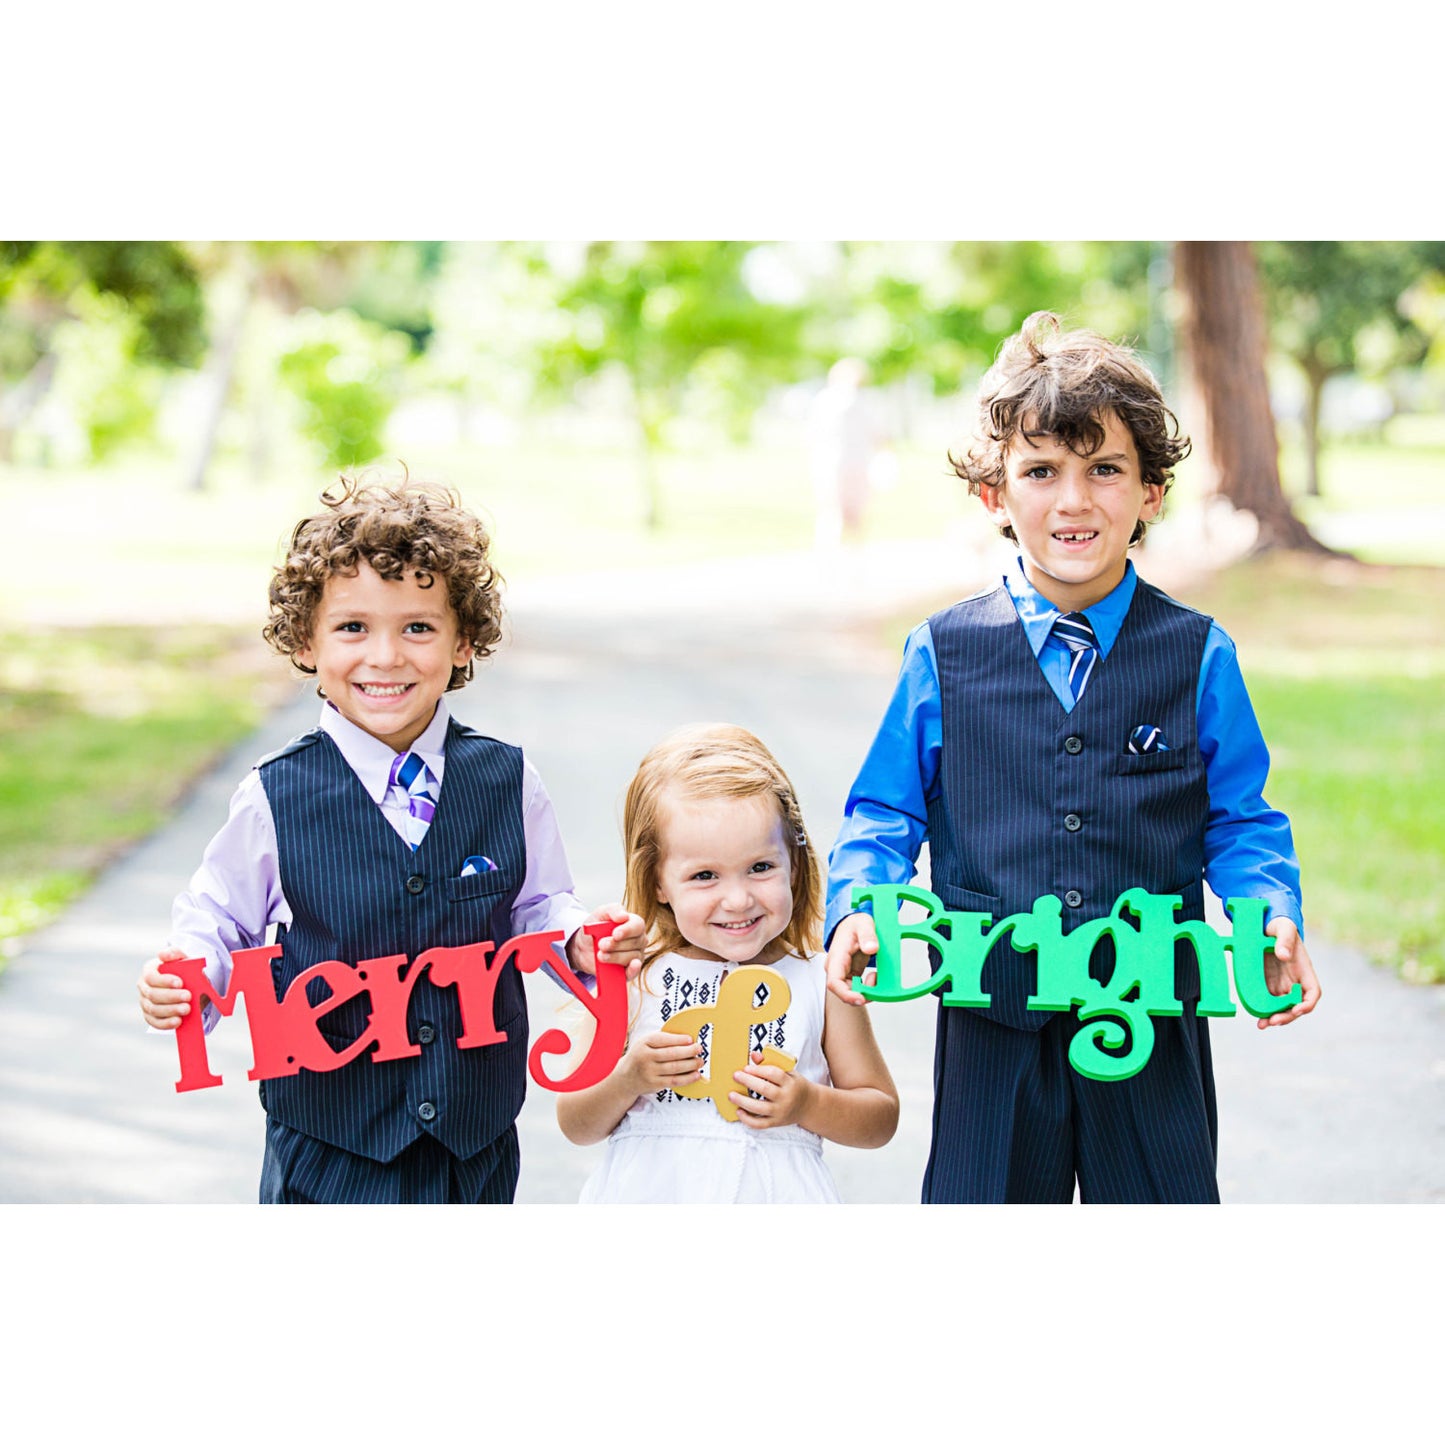 Merry & Bright Photo Prop Sign - Wedding Decor Gifts